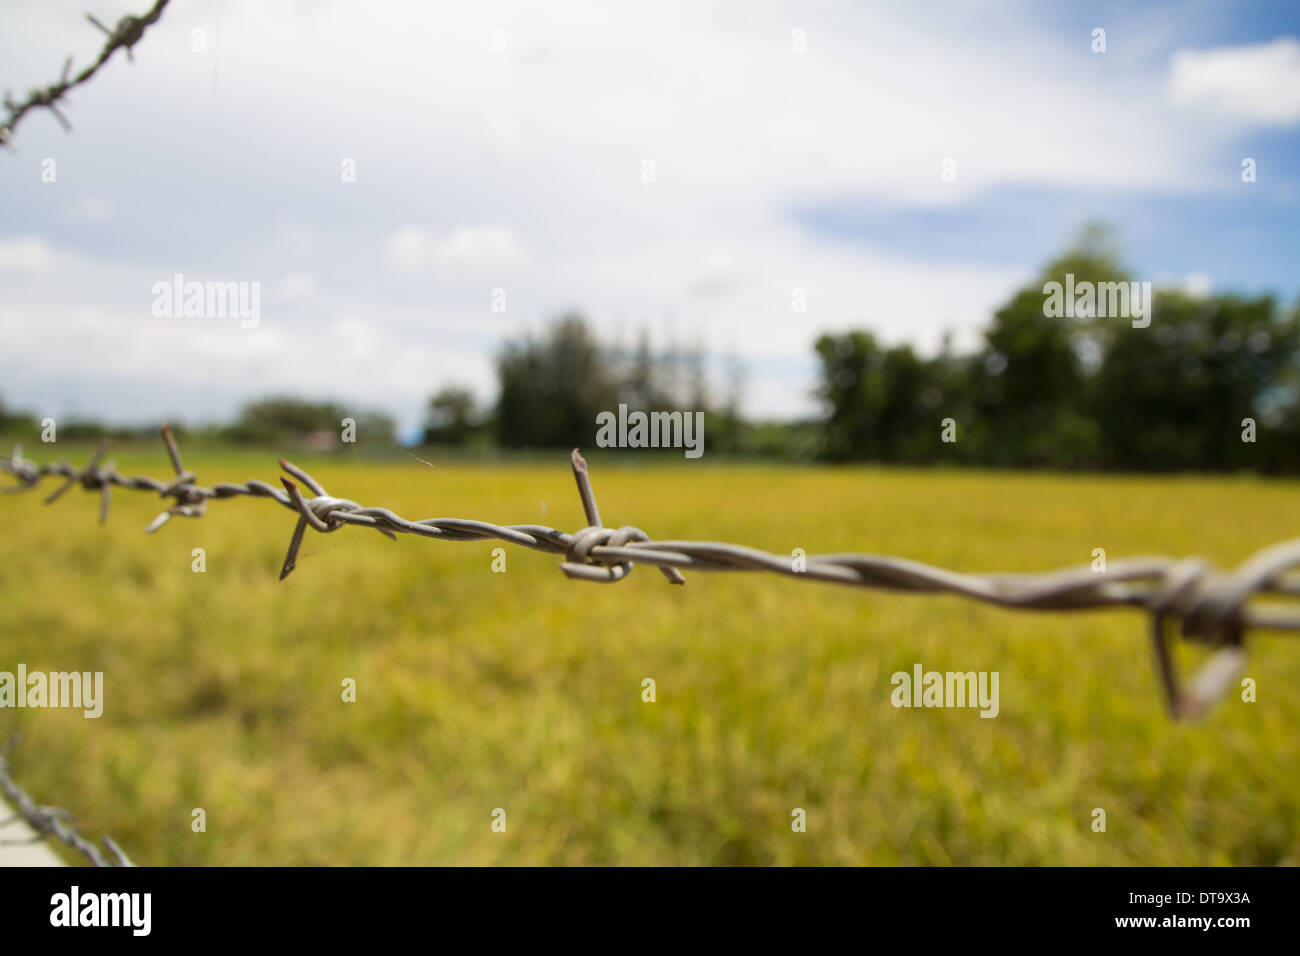 Keep out! Barbwire keeps the animals in the farmer's field. Stock Photo